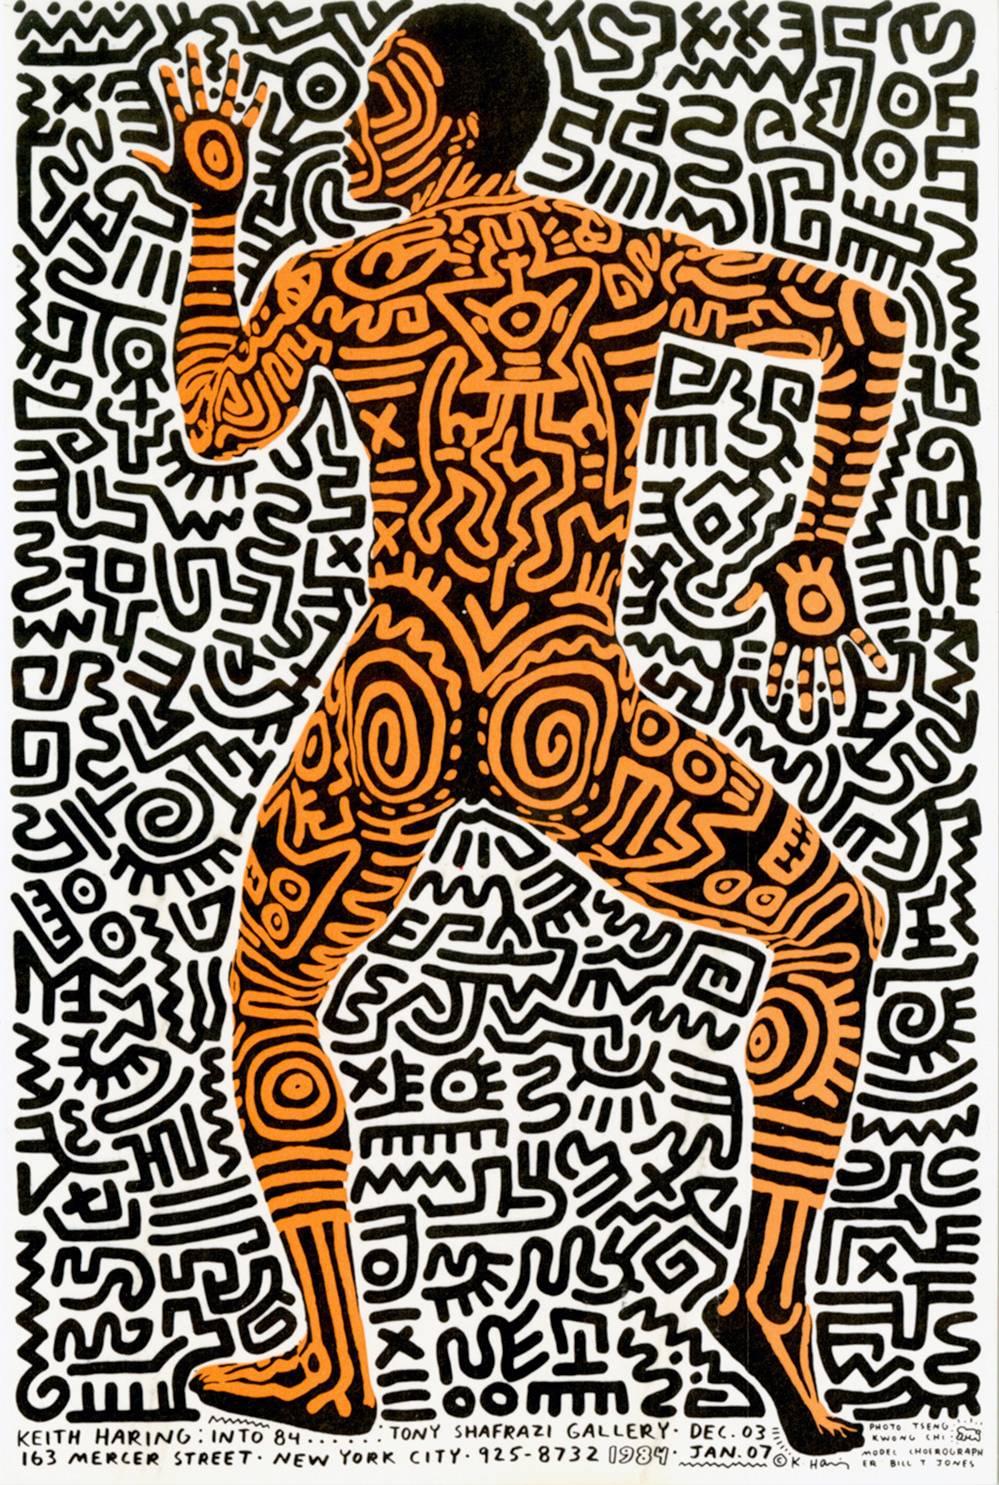 (after) Keith Haring Nude Photograph - Keith Haring Into 84 (Haring Bill T. Jones Shafrazi announcement card 1983)  